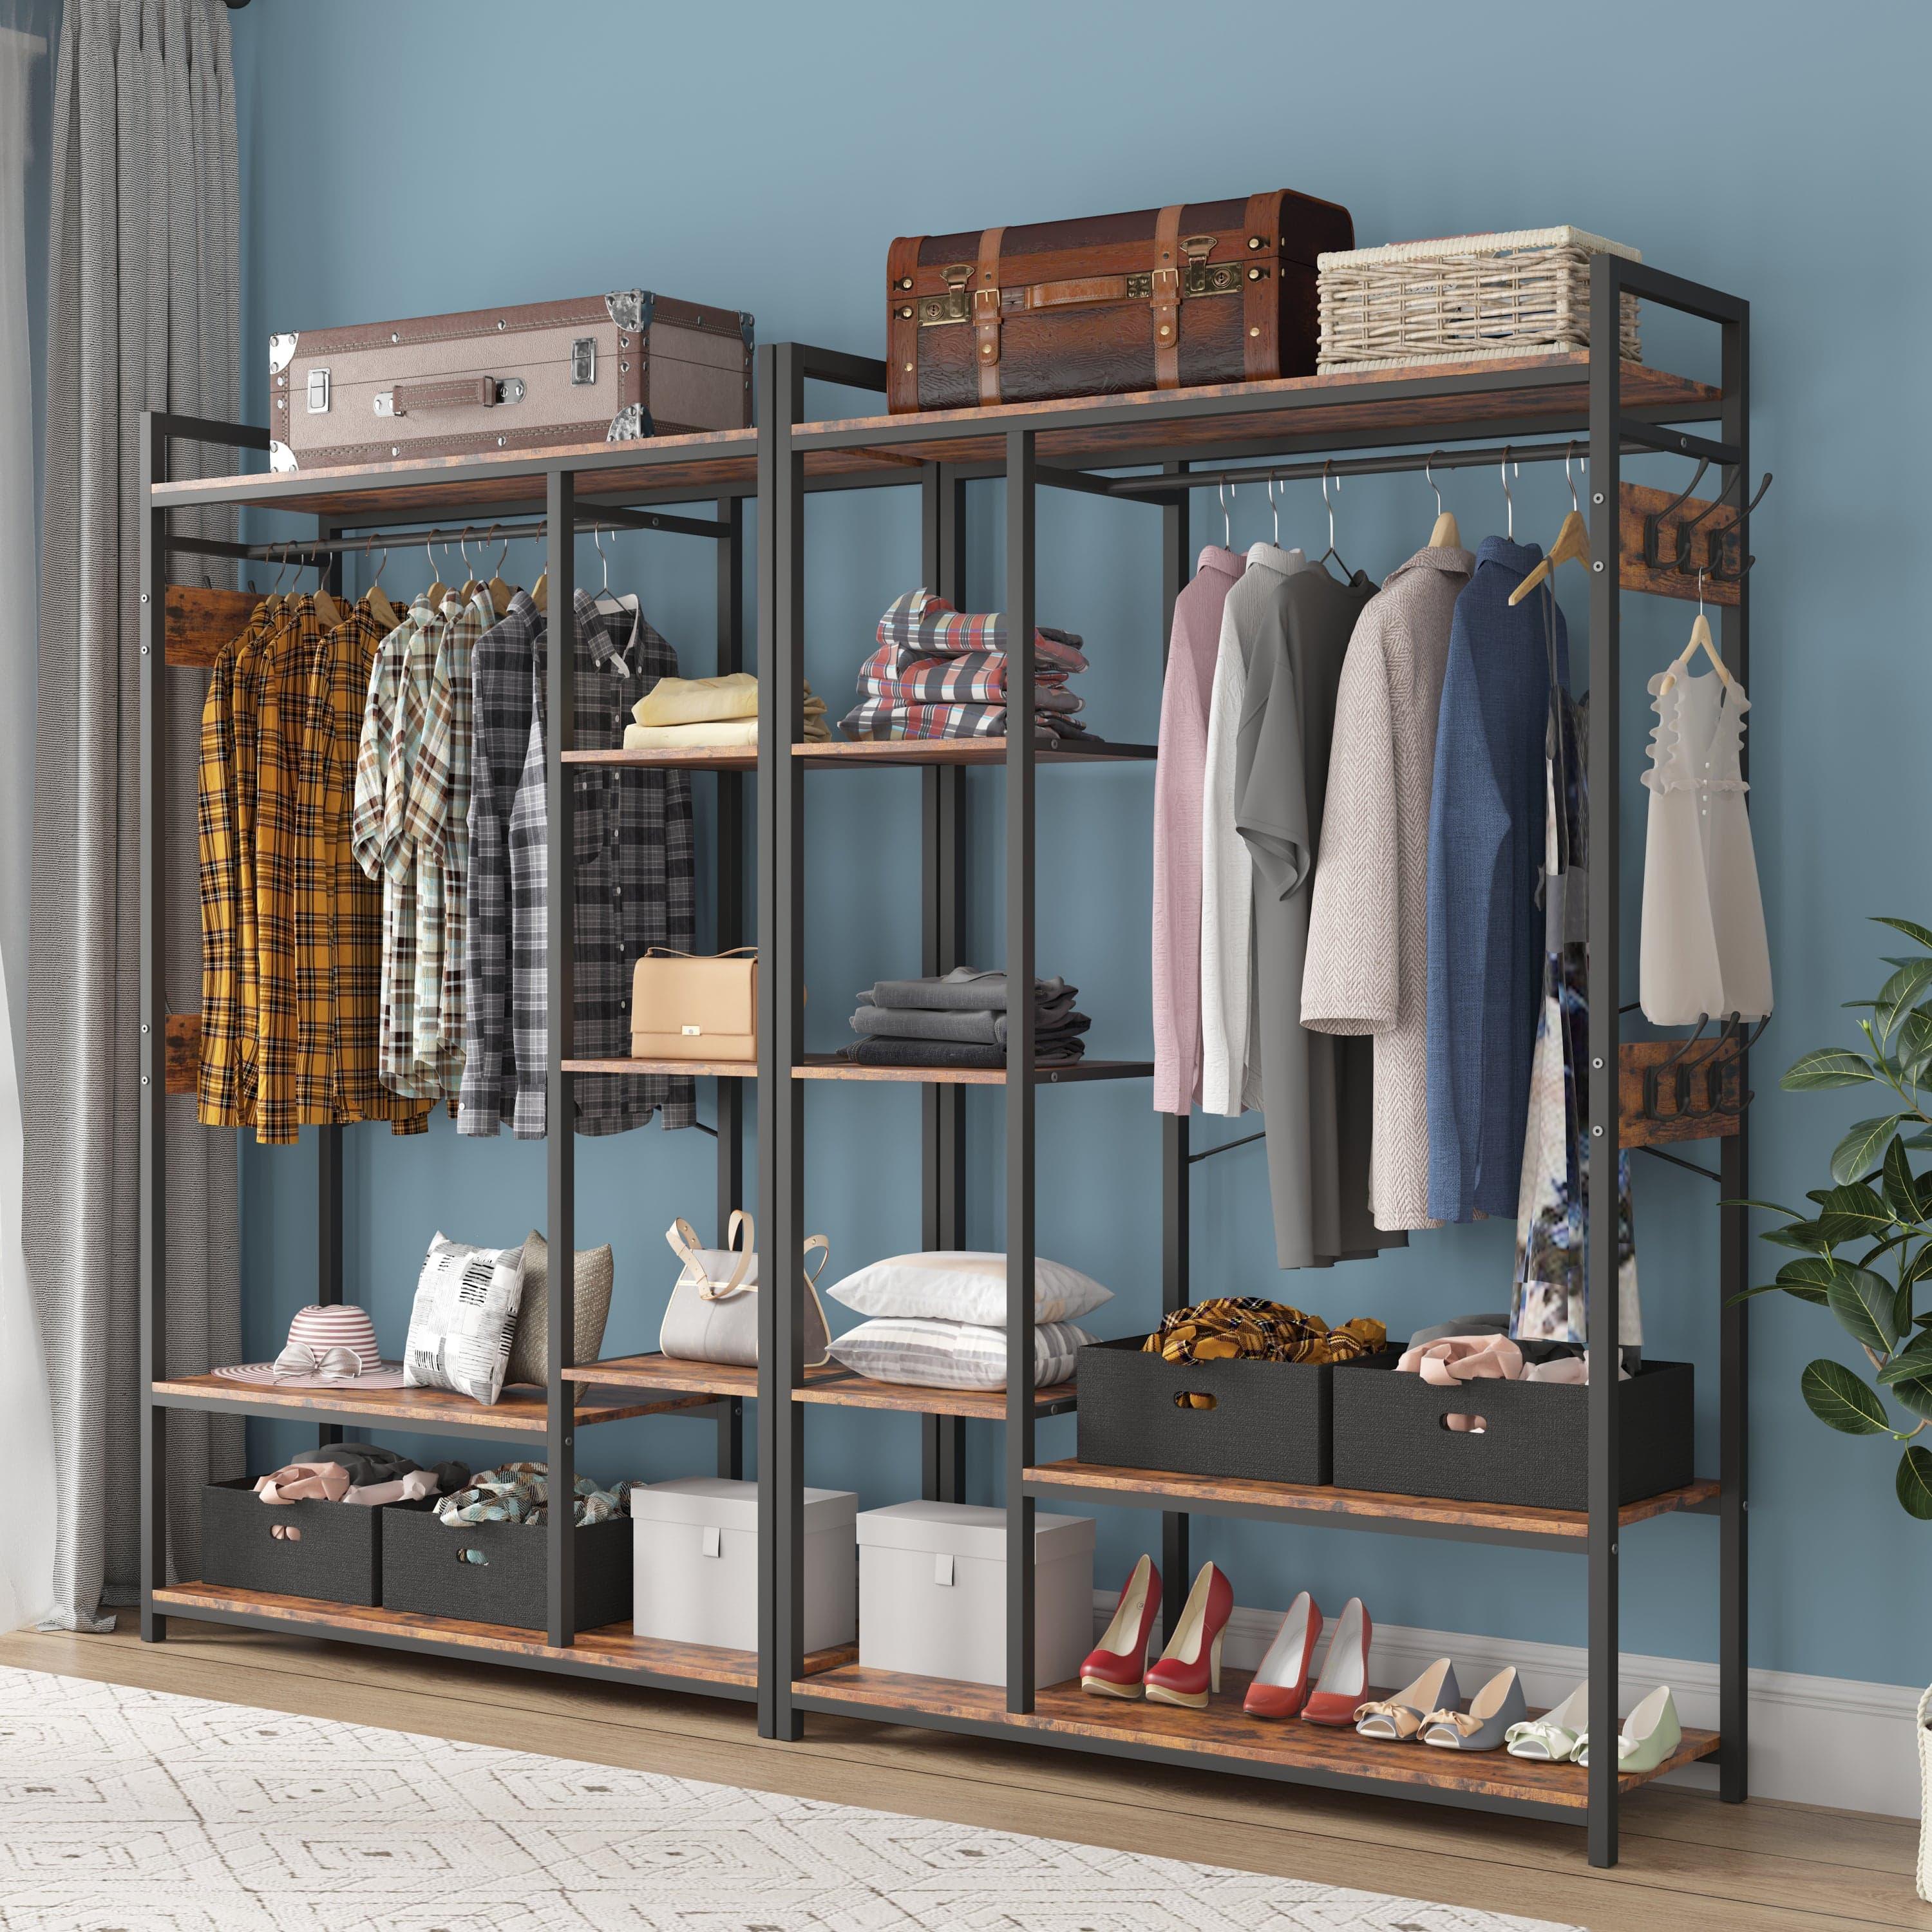 Shop JHX Organized Garment Rack with Storage, Free-Standing Closet System with Open Shelves and Hanging Rod(Rustic Brown,43.7’’w x 15.75’’d x 70.08’’h). Mademoiselle Home Decor